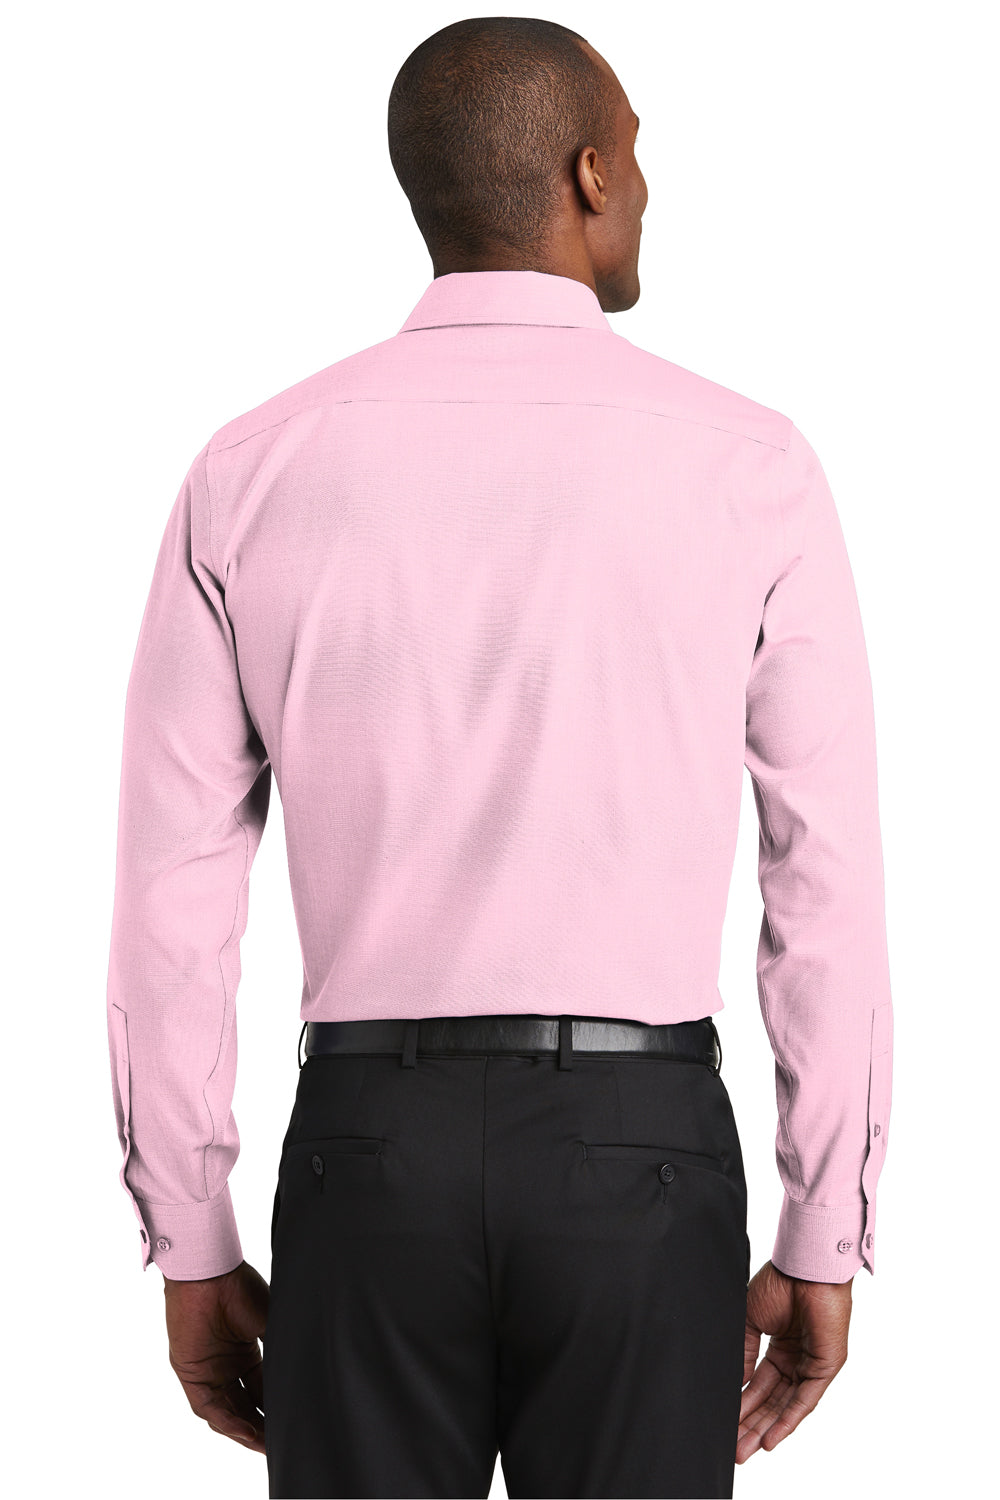 Red House RH390 Mens Nailhead Wrinkle Resistant Long Sleeve Button Down Shirt Pink Back